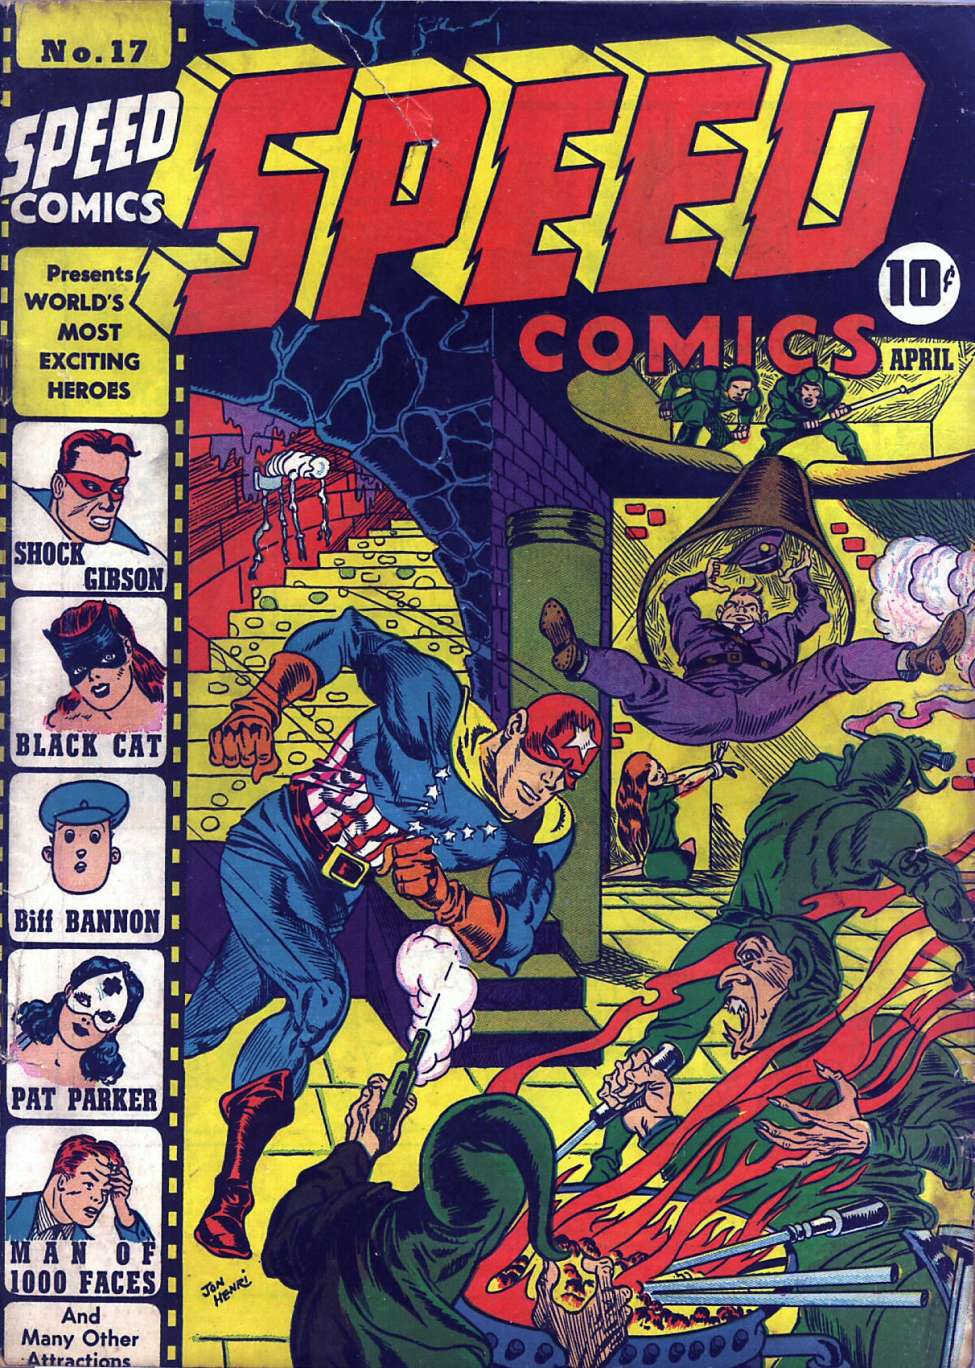 Comic Book Cover For Speed Comics 17